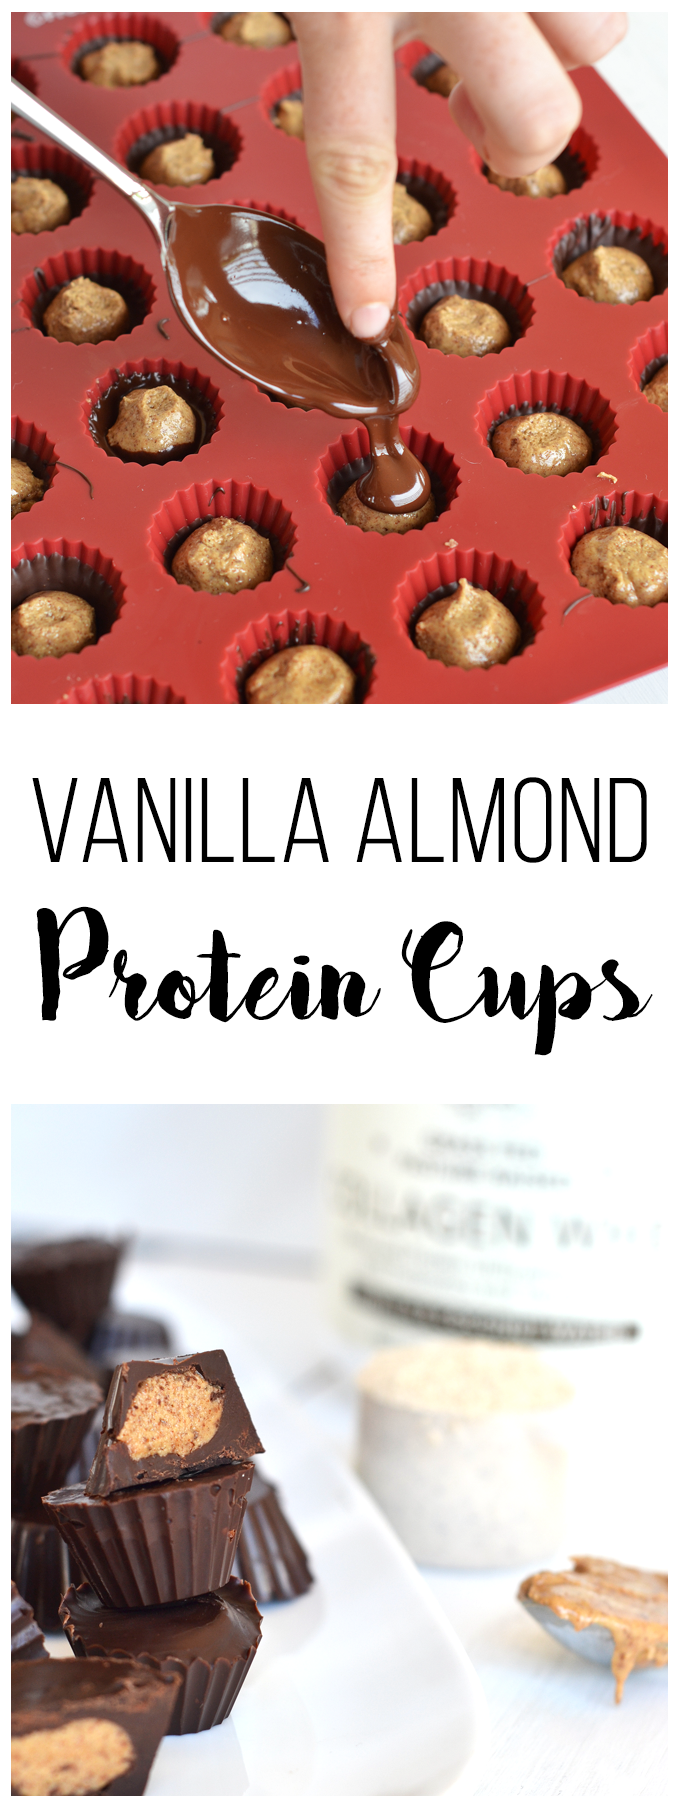 These Vanilla Almond Protein Cups are the perfect, protein packed treat! Using Vital Proteins Collagen Whey adds the flavor and protein!